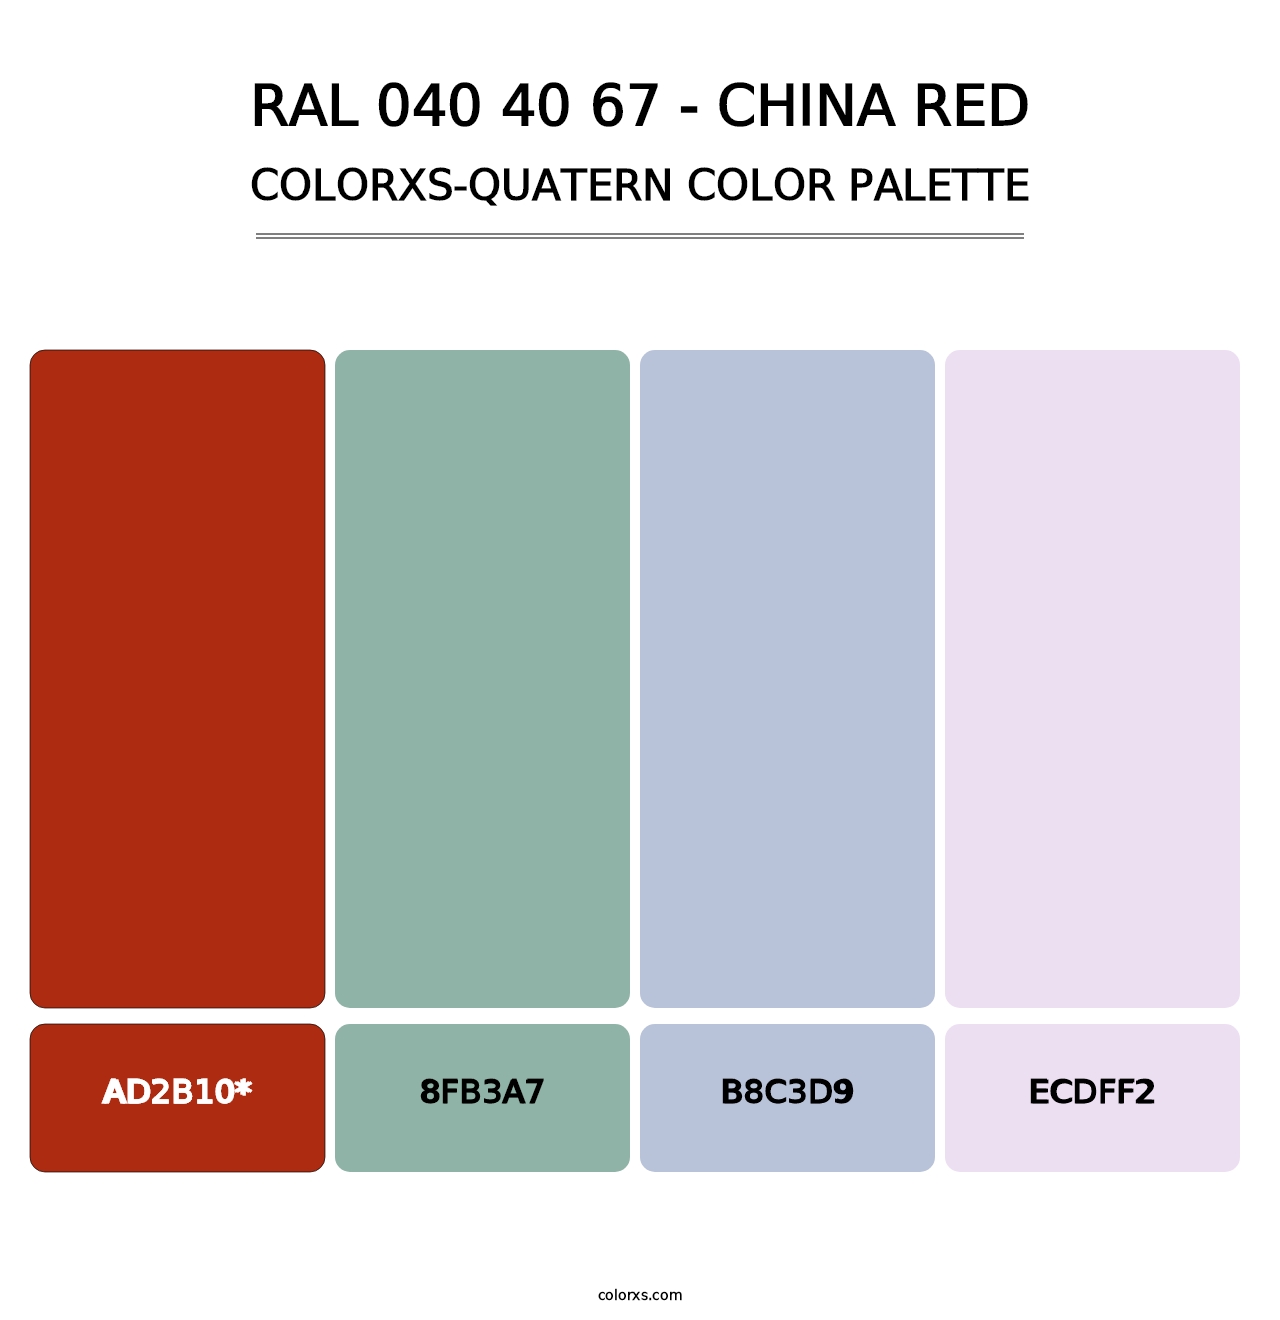 RAL 040 40 67 - China Red - Colorxs Quatern Palette